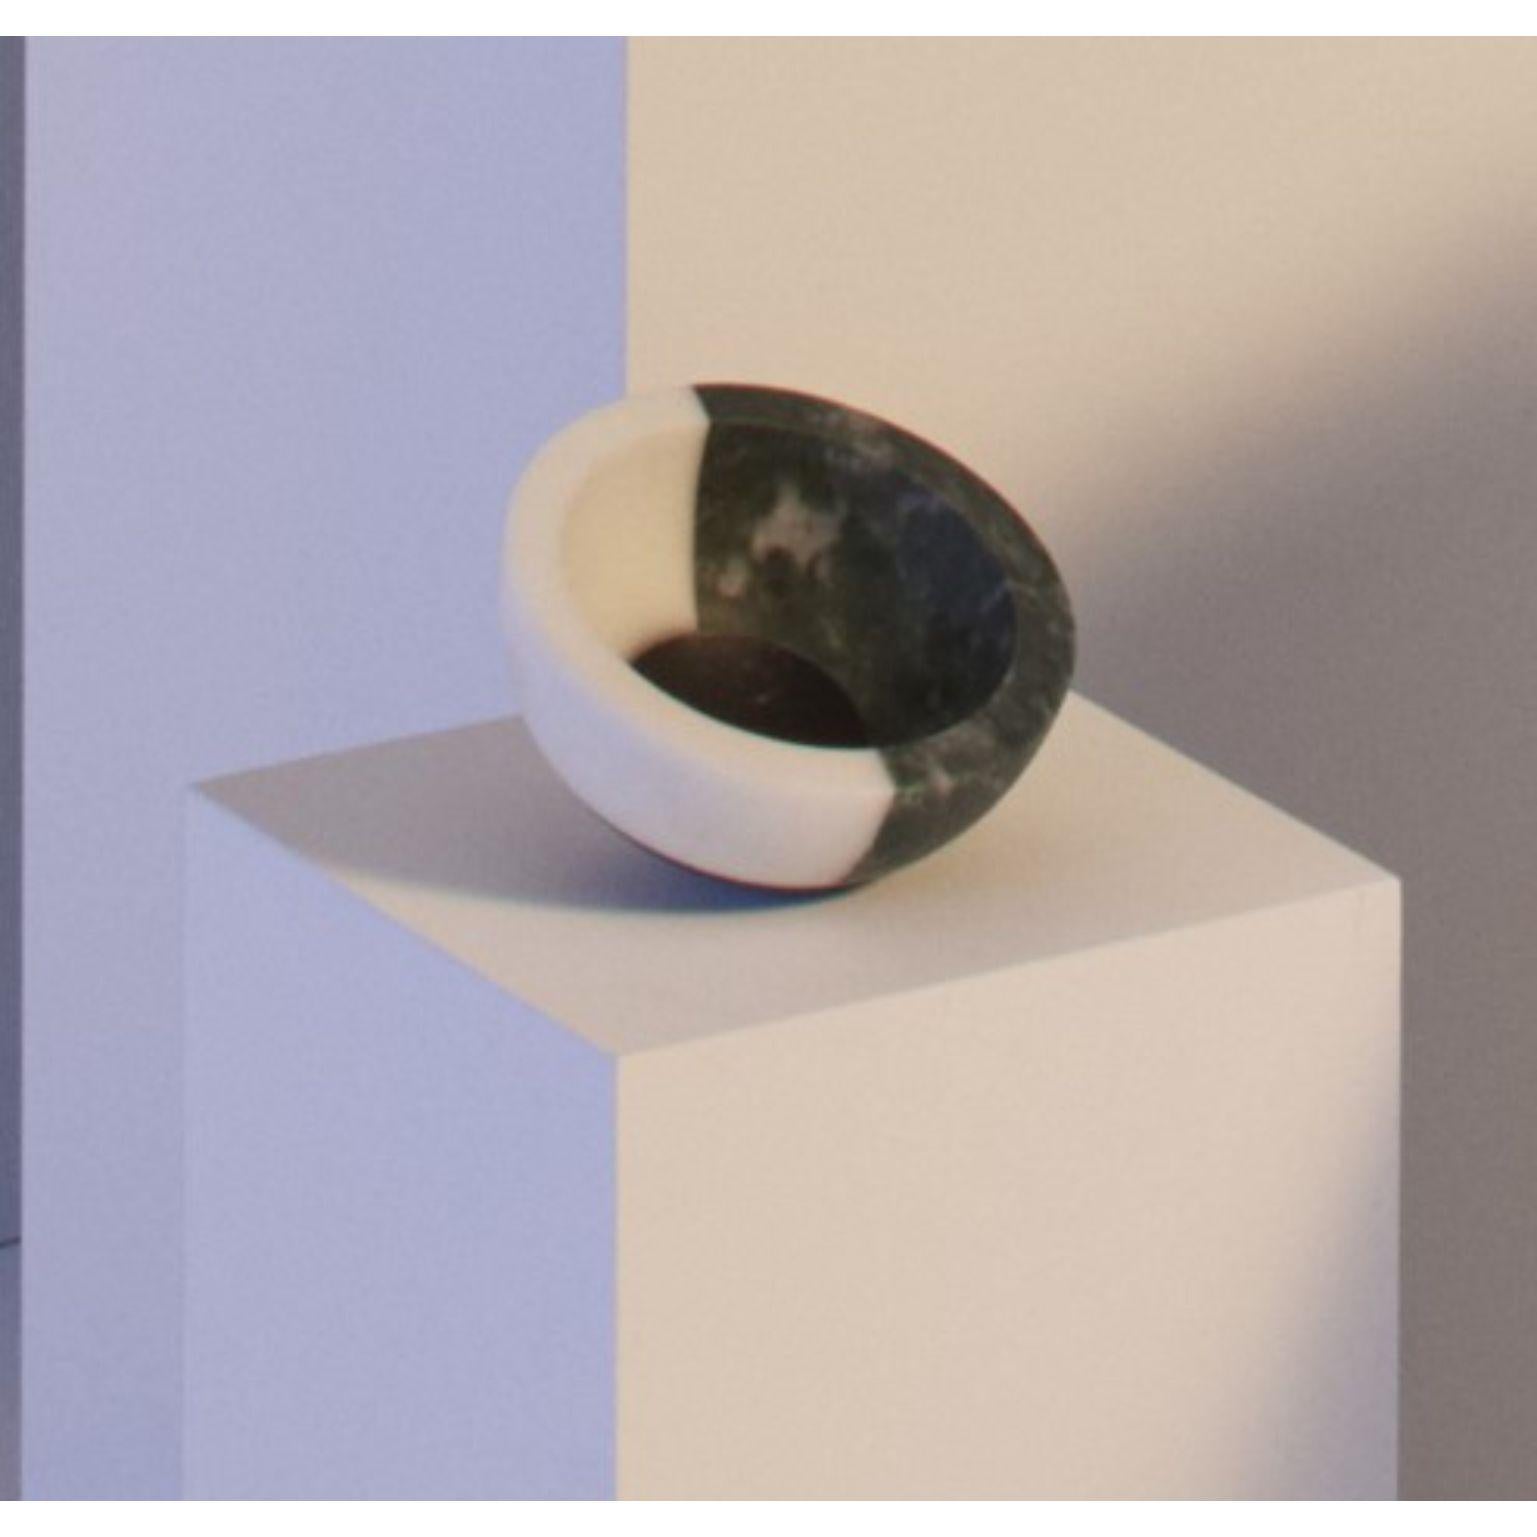 Gae small bowl by Arthur Arbesser
Masters Collection
Dimensions: 13.5 x 7 cm
Materials: Nero Marquinia, Bianco Michelangelo, Verde Guatemala

The history of design – often a synonym for project or plan – guides us through the philosophy of